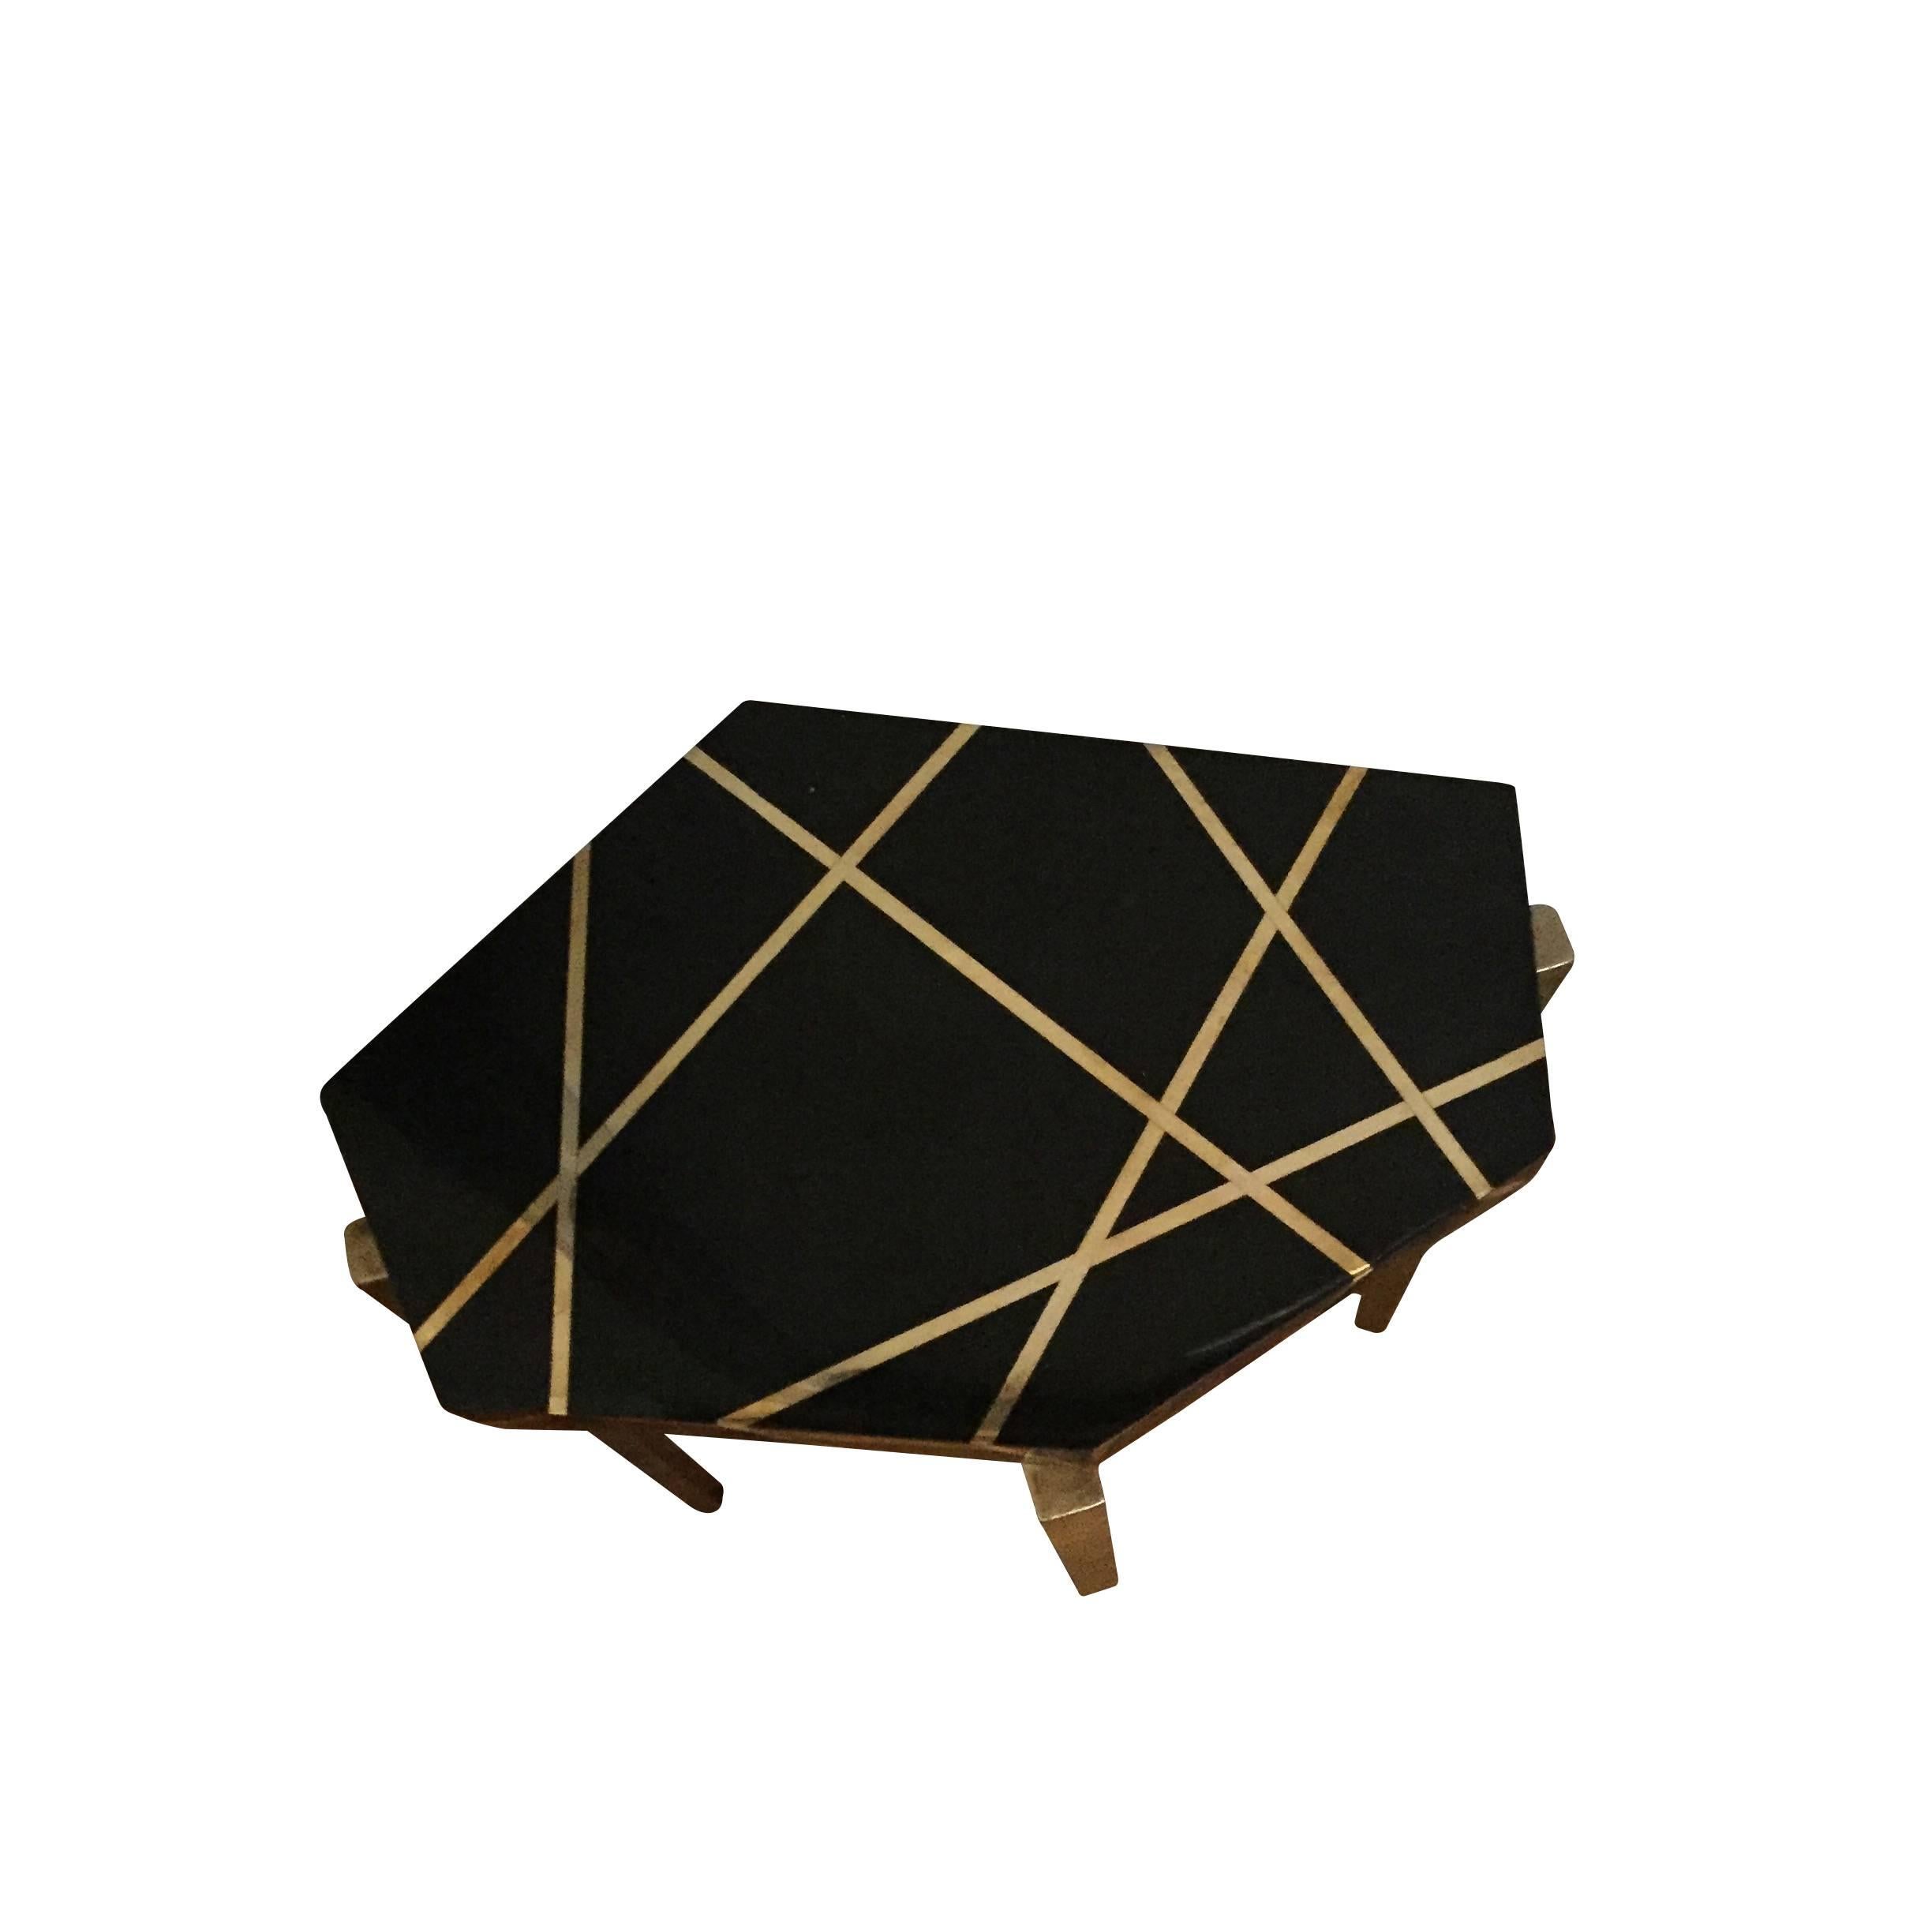 Contemporary French thick black crackle wood top with brass inlay cocktail table.
Hexagonal shape top with tapered bronze legs.
          